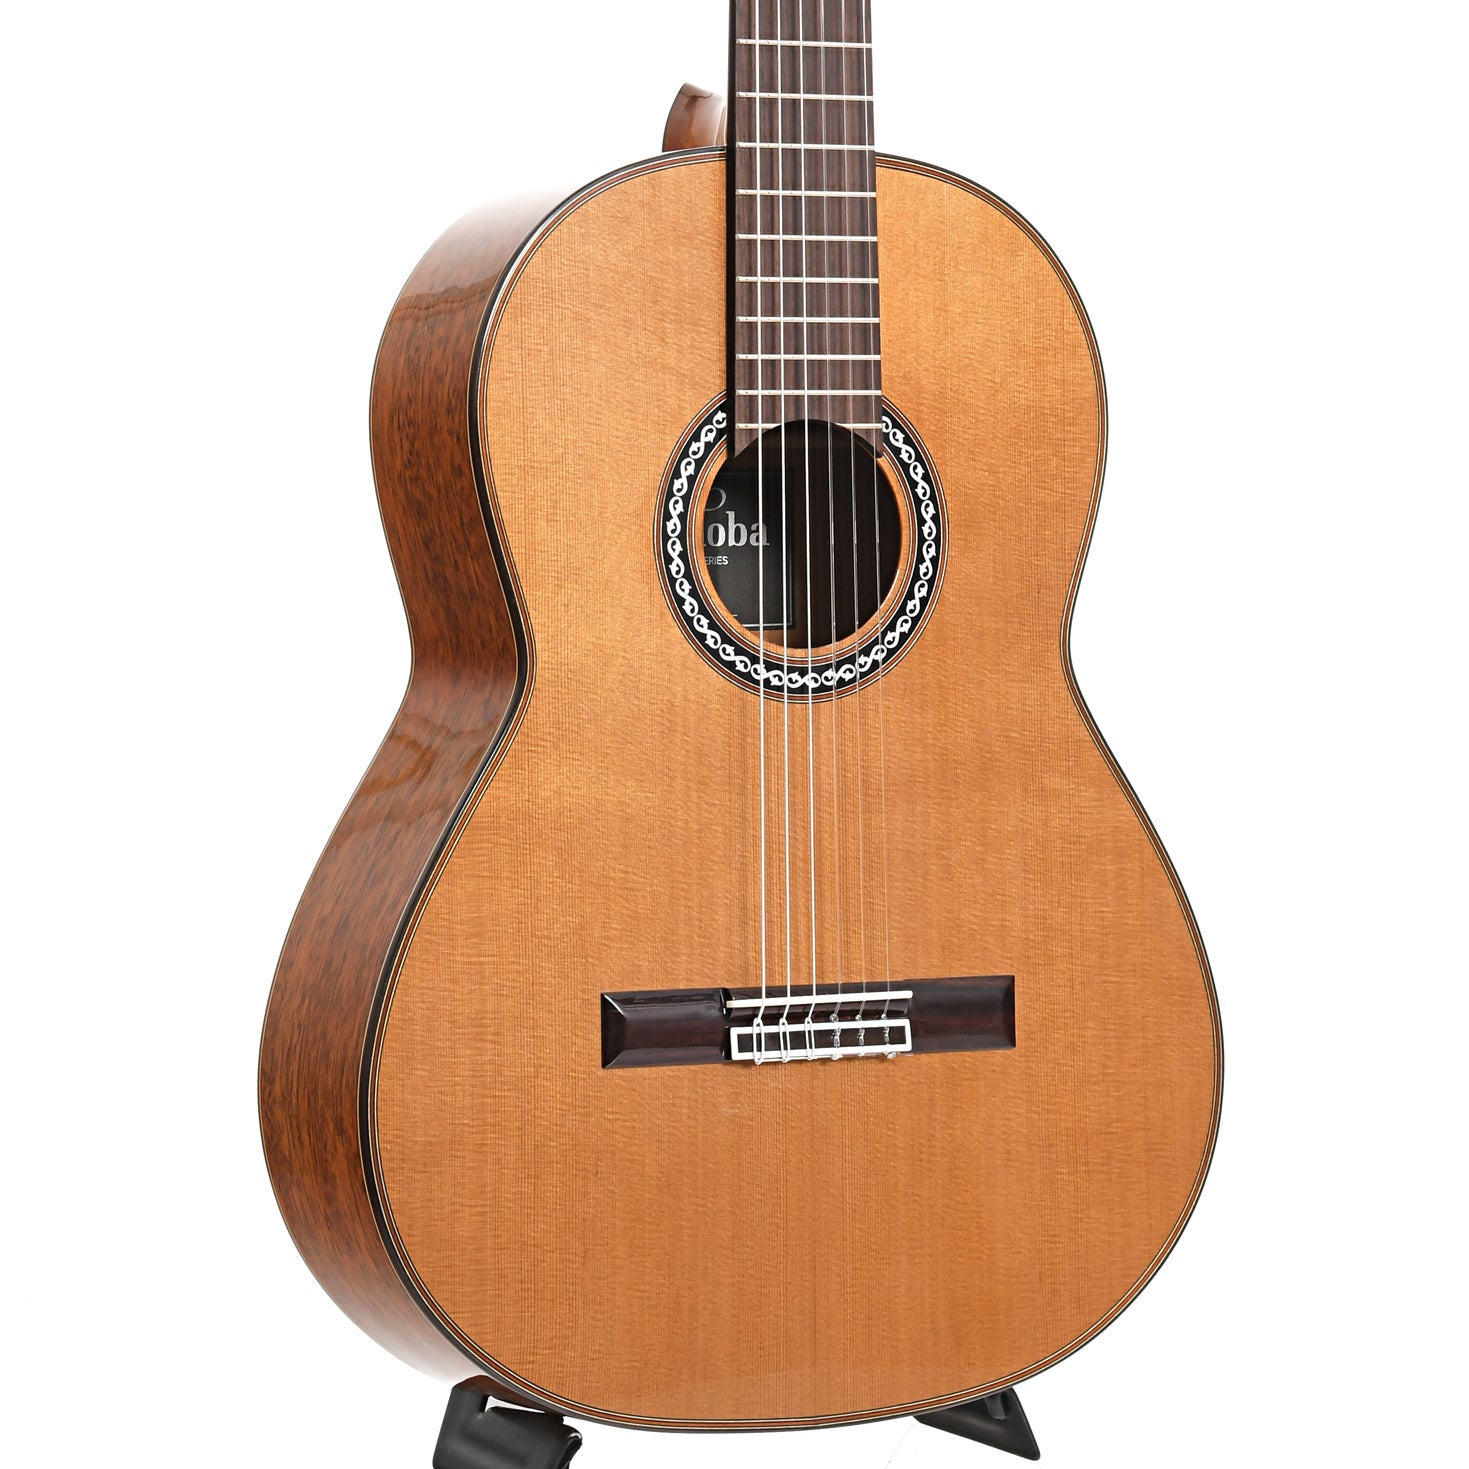 Image 4 of Cordoba C9 Parlor Classical Guitar and Case - SKU# CORC9D : Product Type Classical & Flamenco Guitars : Elderly Instruments